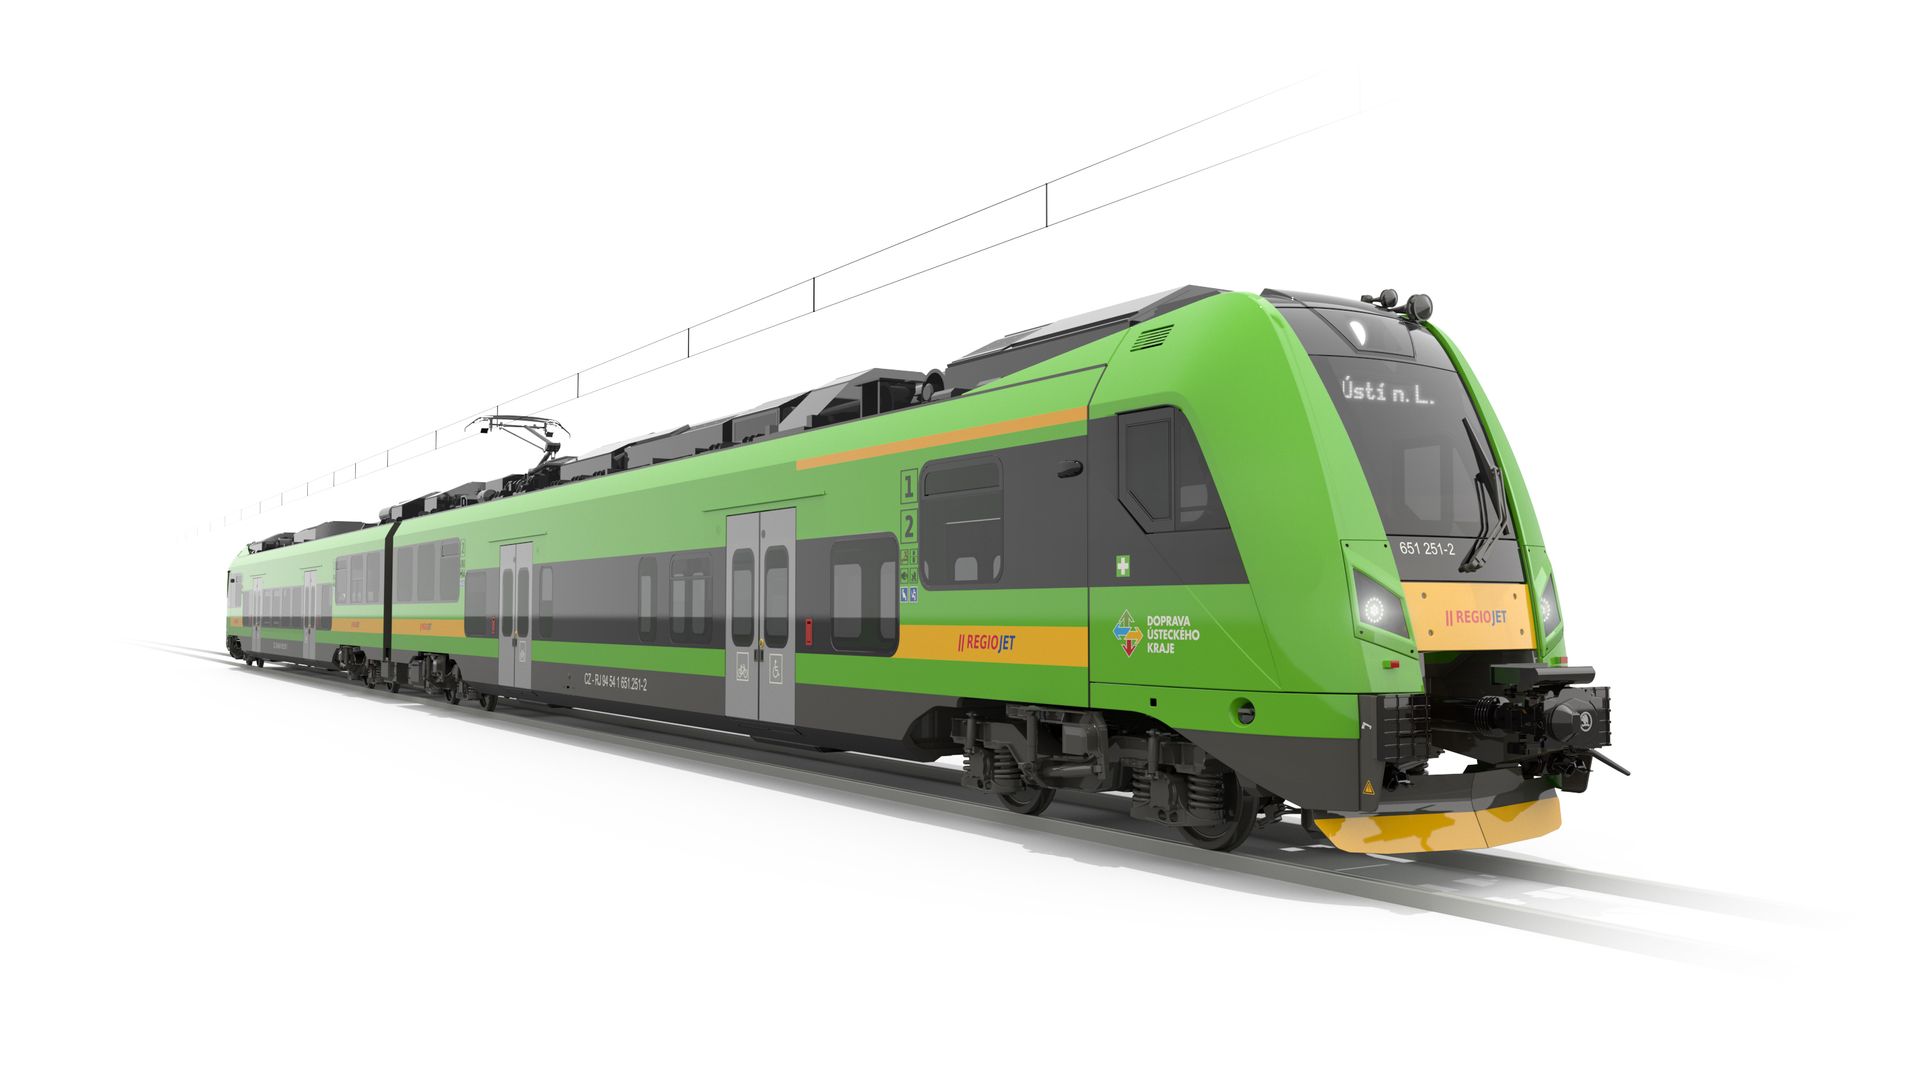 A visualisation of the newly ordered EMUs for RegioJet